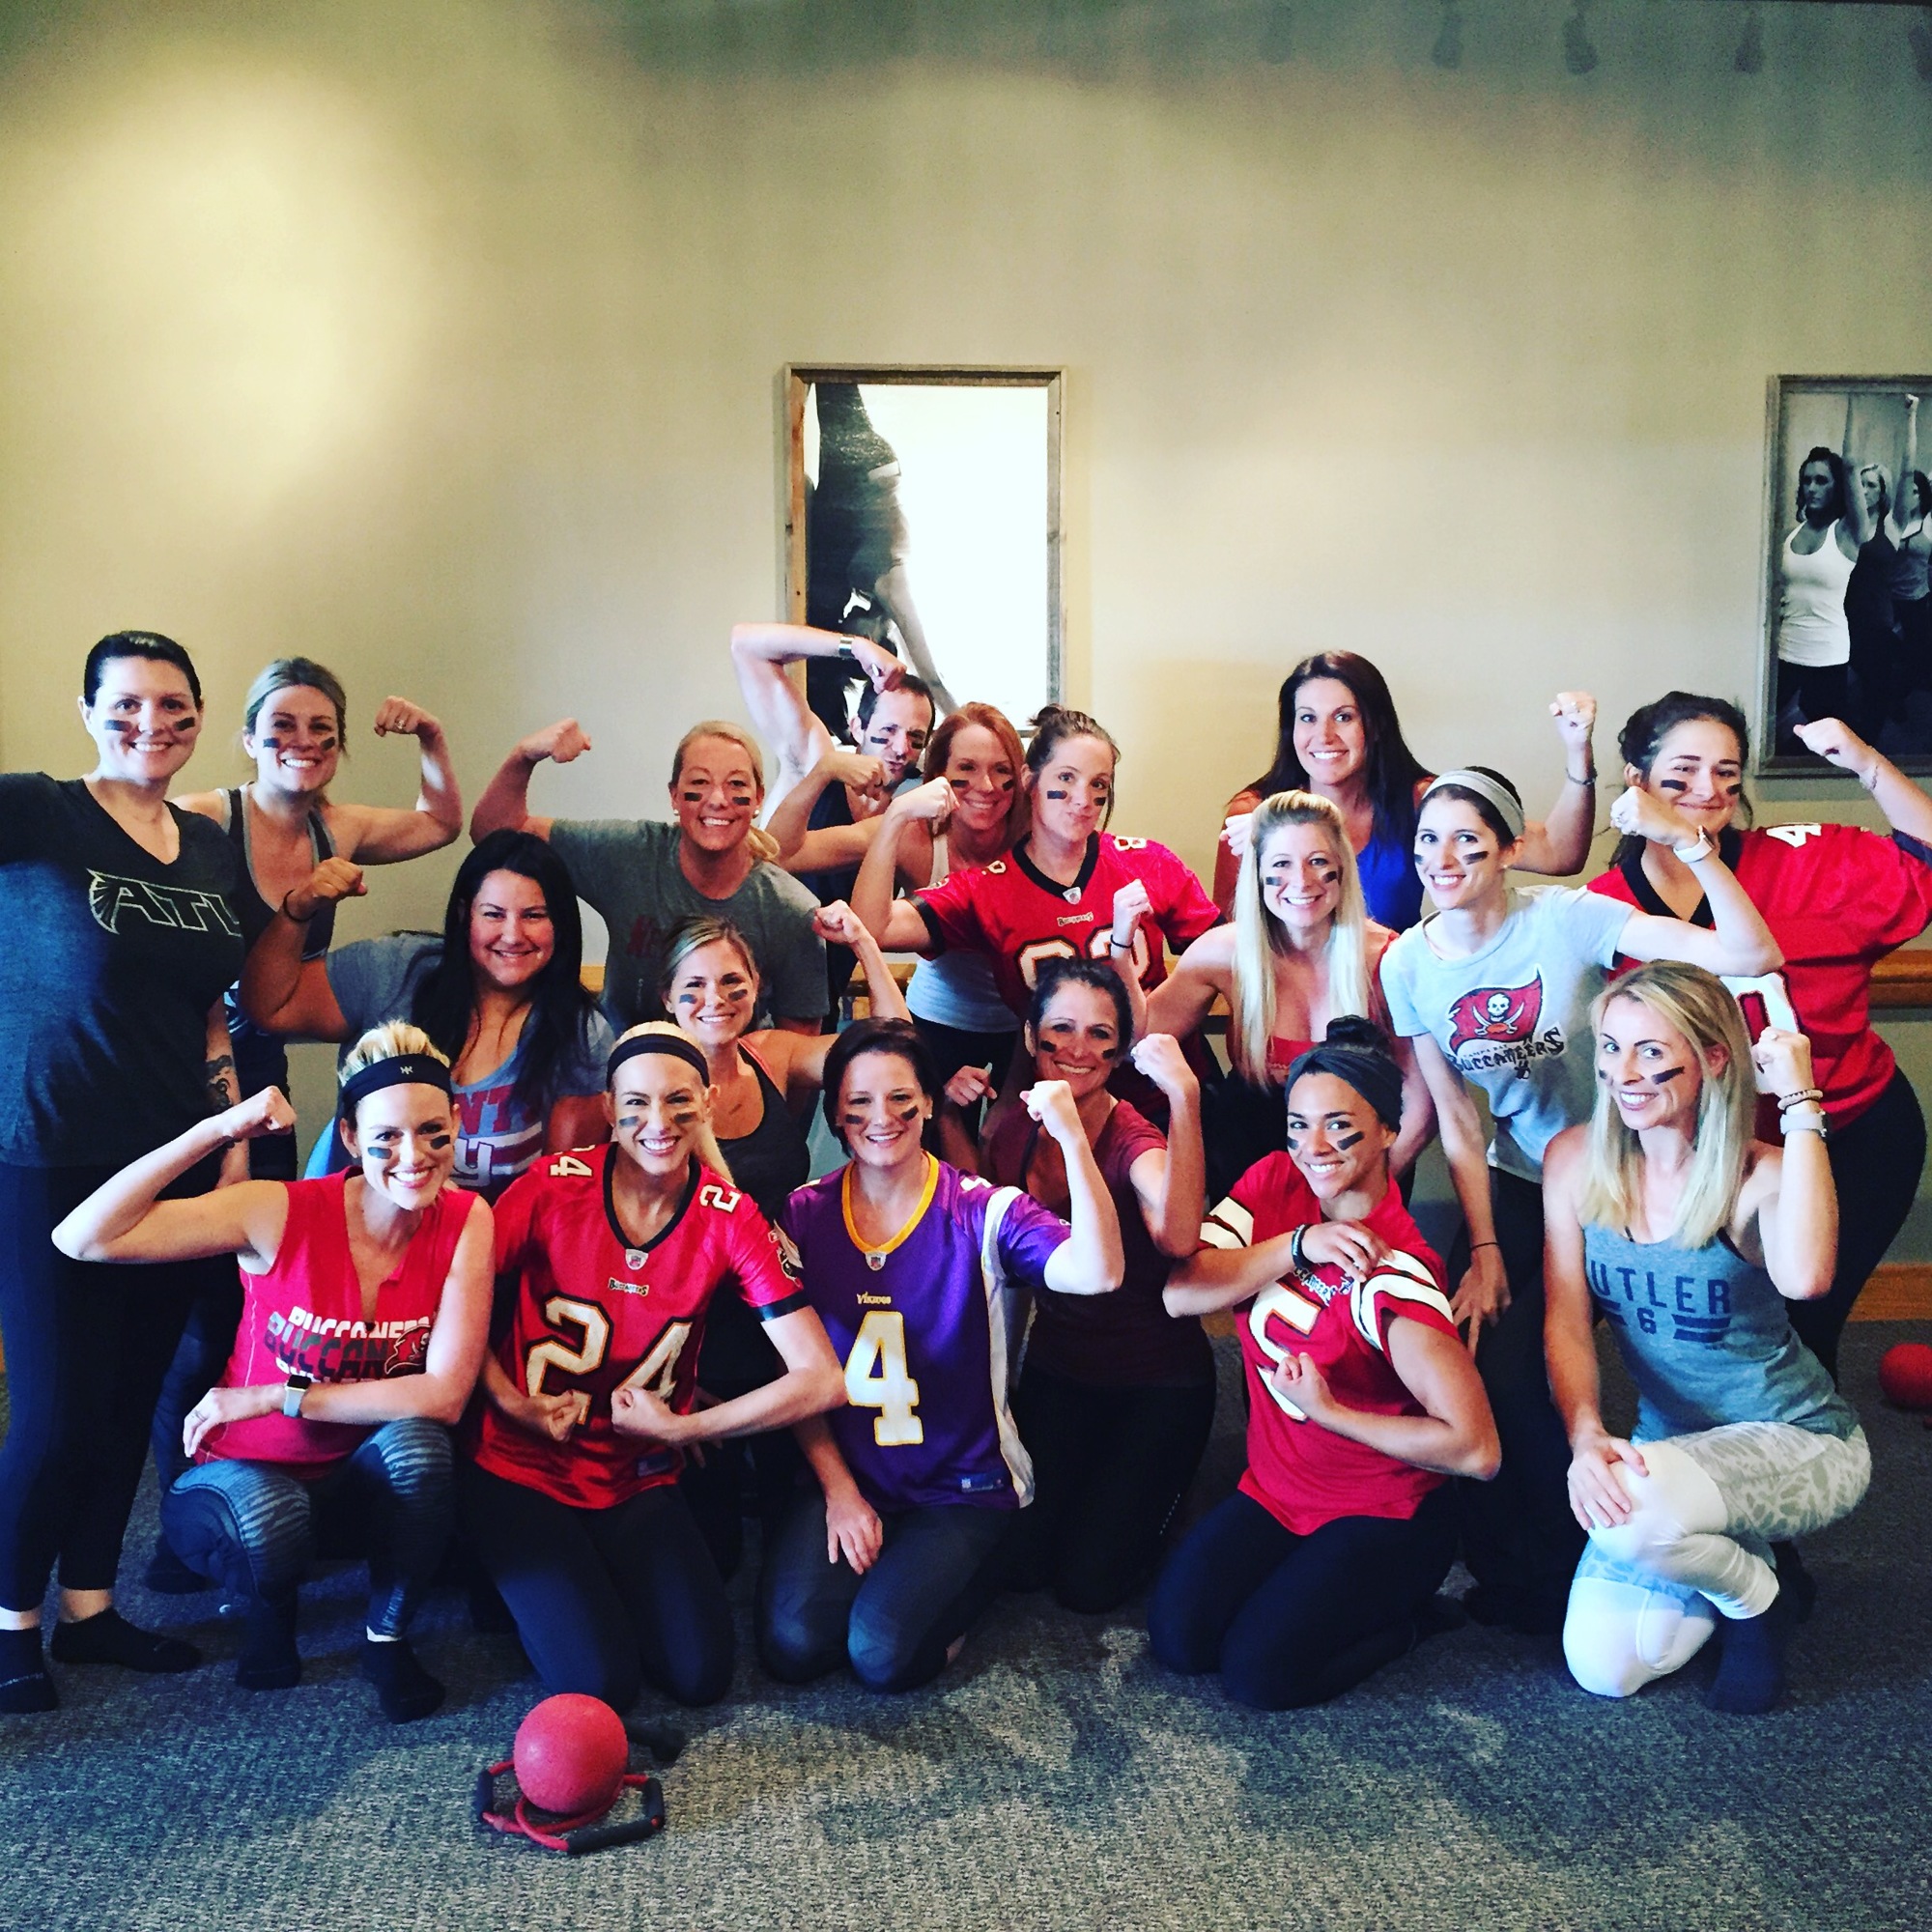 Guests at “Brunch & Burn Before the Big Game” show off their muscles at Pure Barre on Feb. 5. Photo courtesy of Montana Taplinger